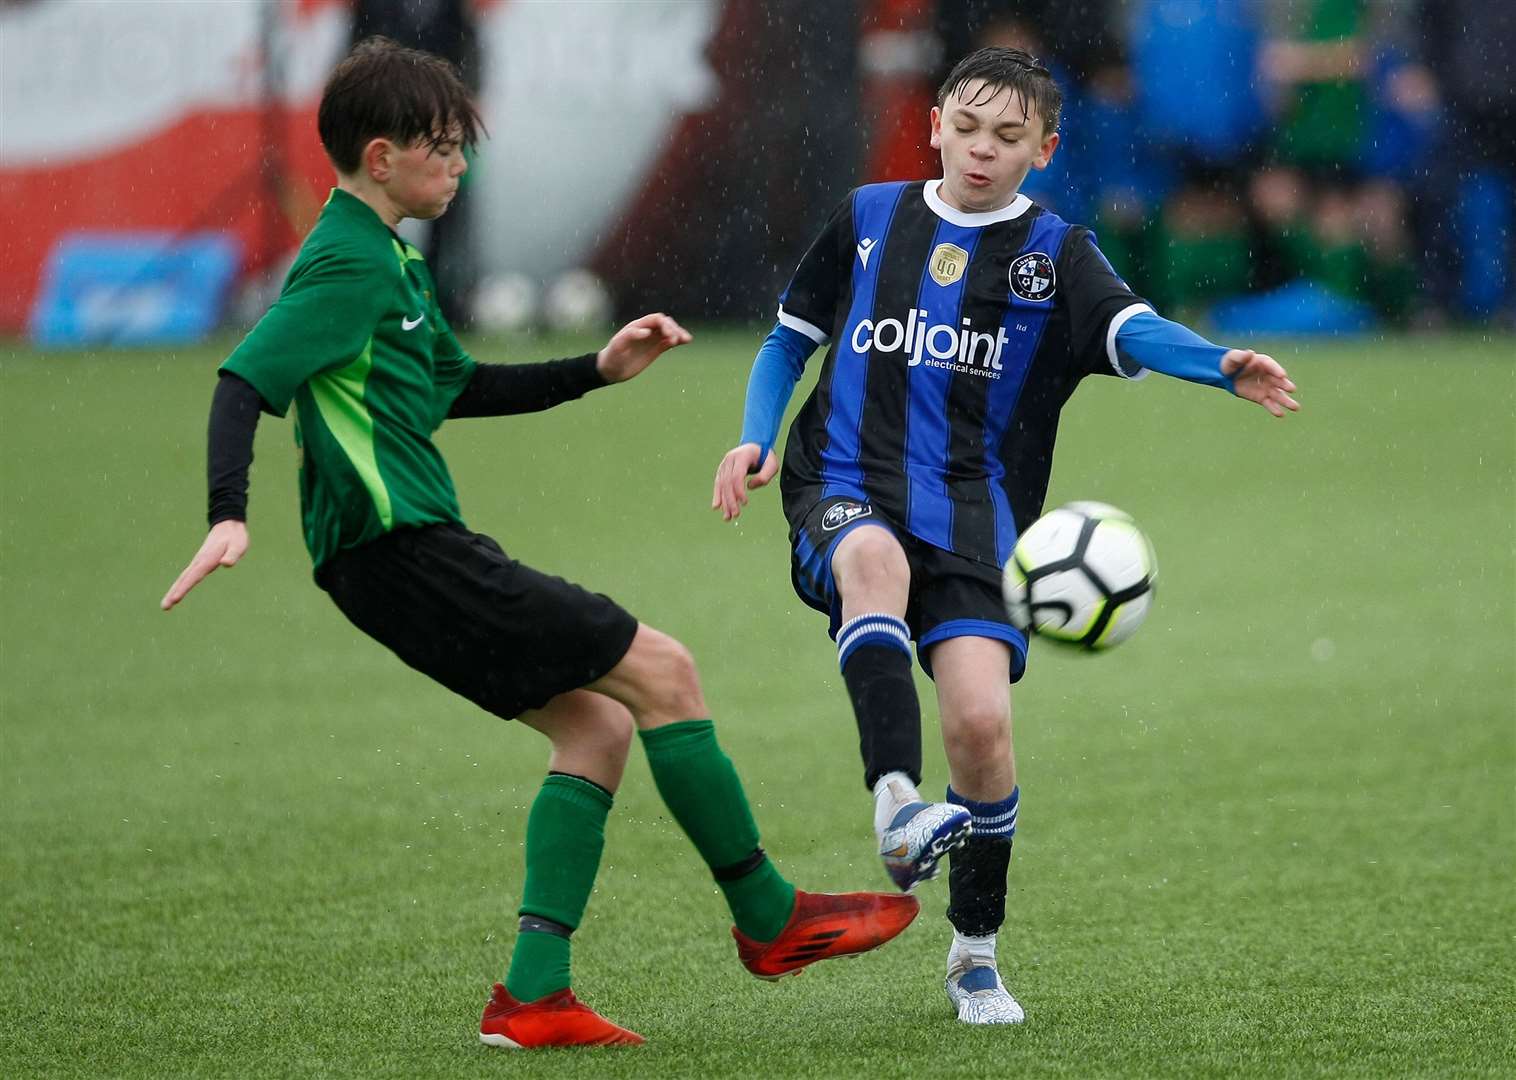 Sevenoaks Town under-13s compete with Long Lane under-13s (blue). Picture: PSP Images